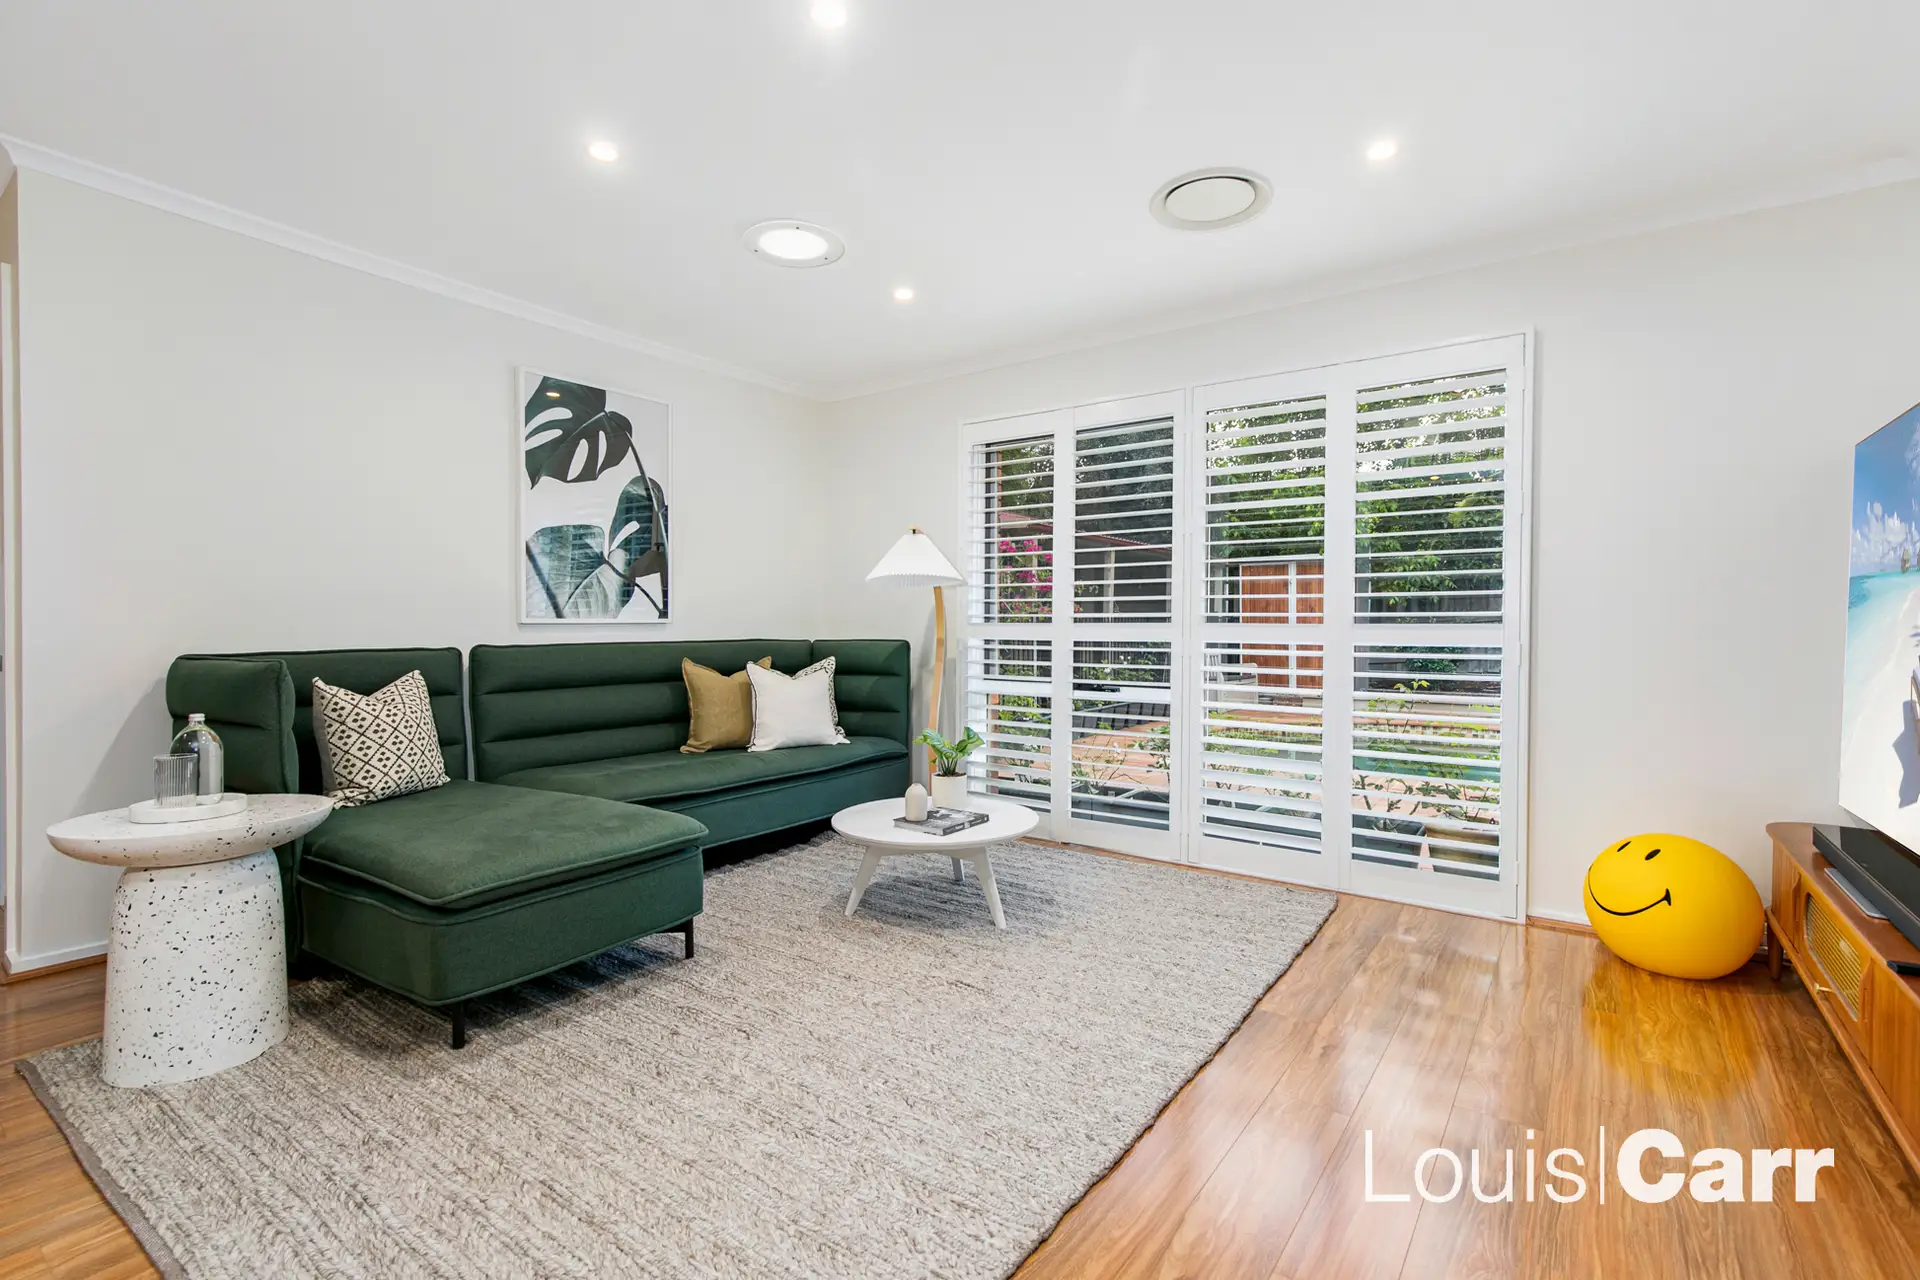 Photo #3: 8 Kalumna Close, Cherrybrook - Sold by Louis Carr Real Estate